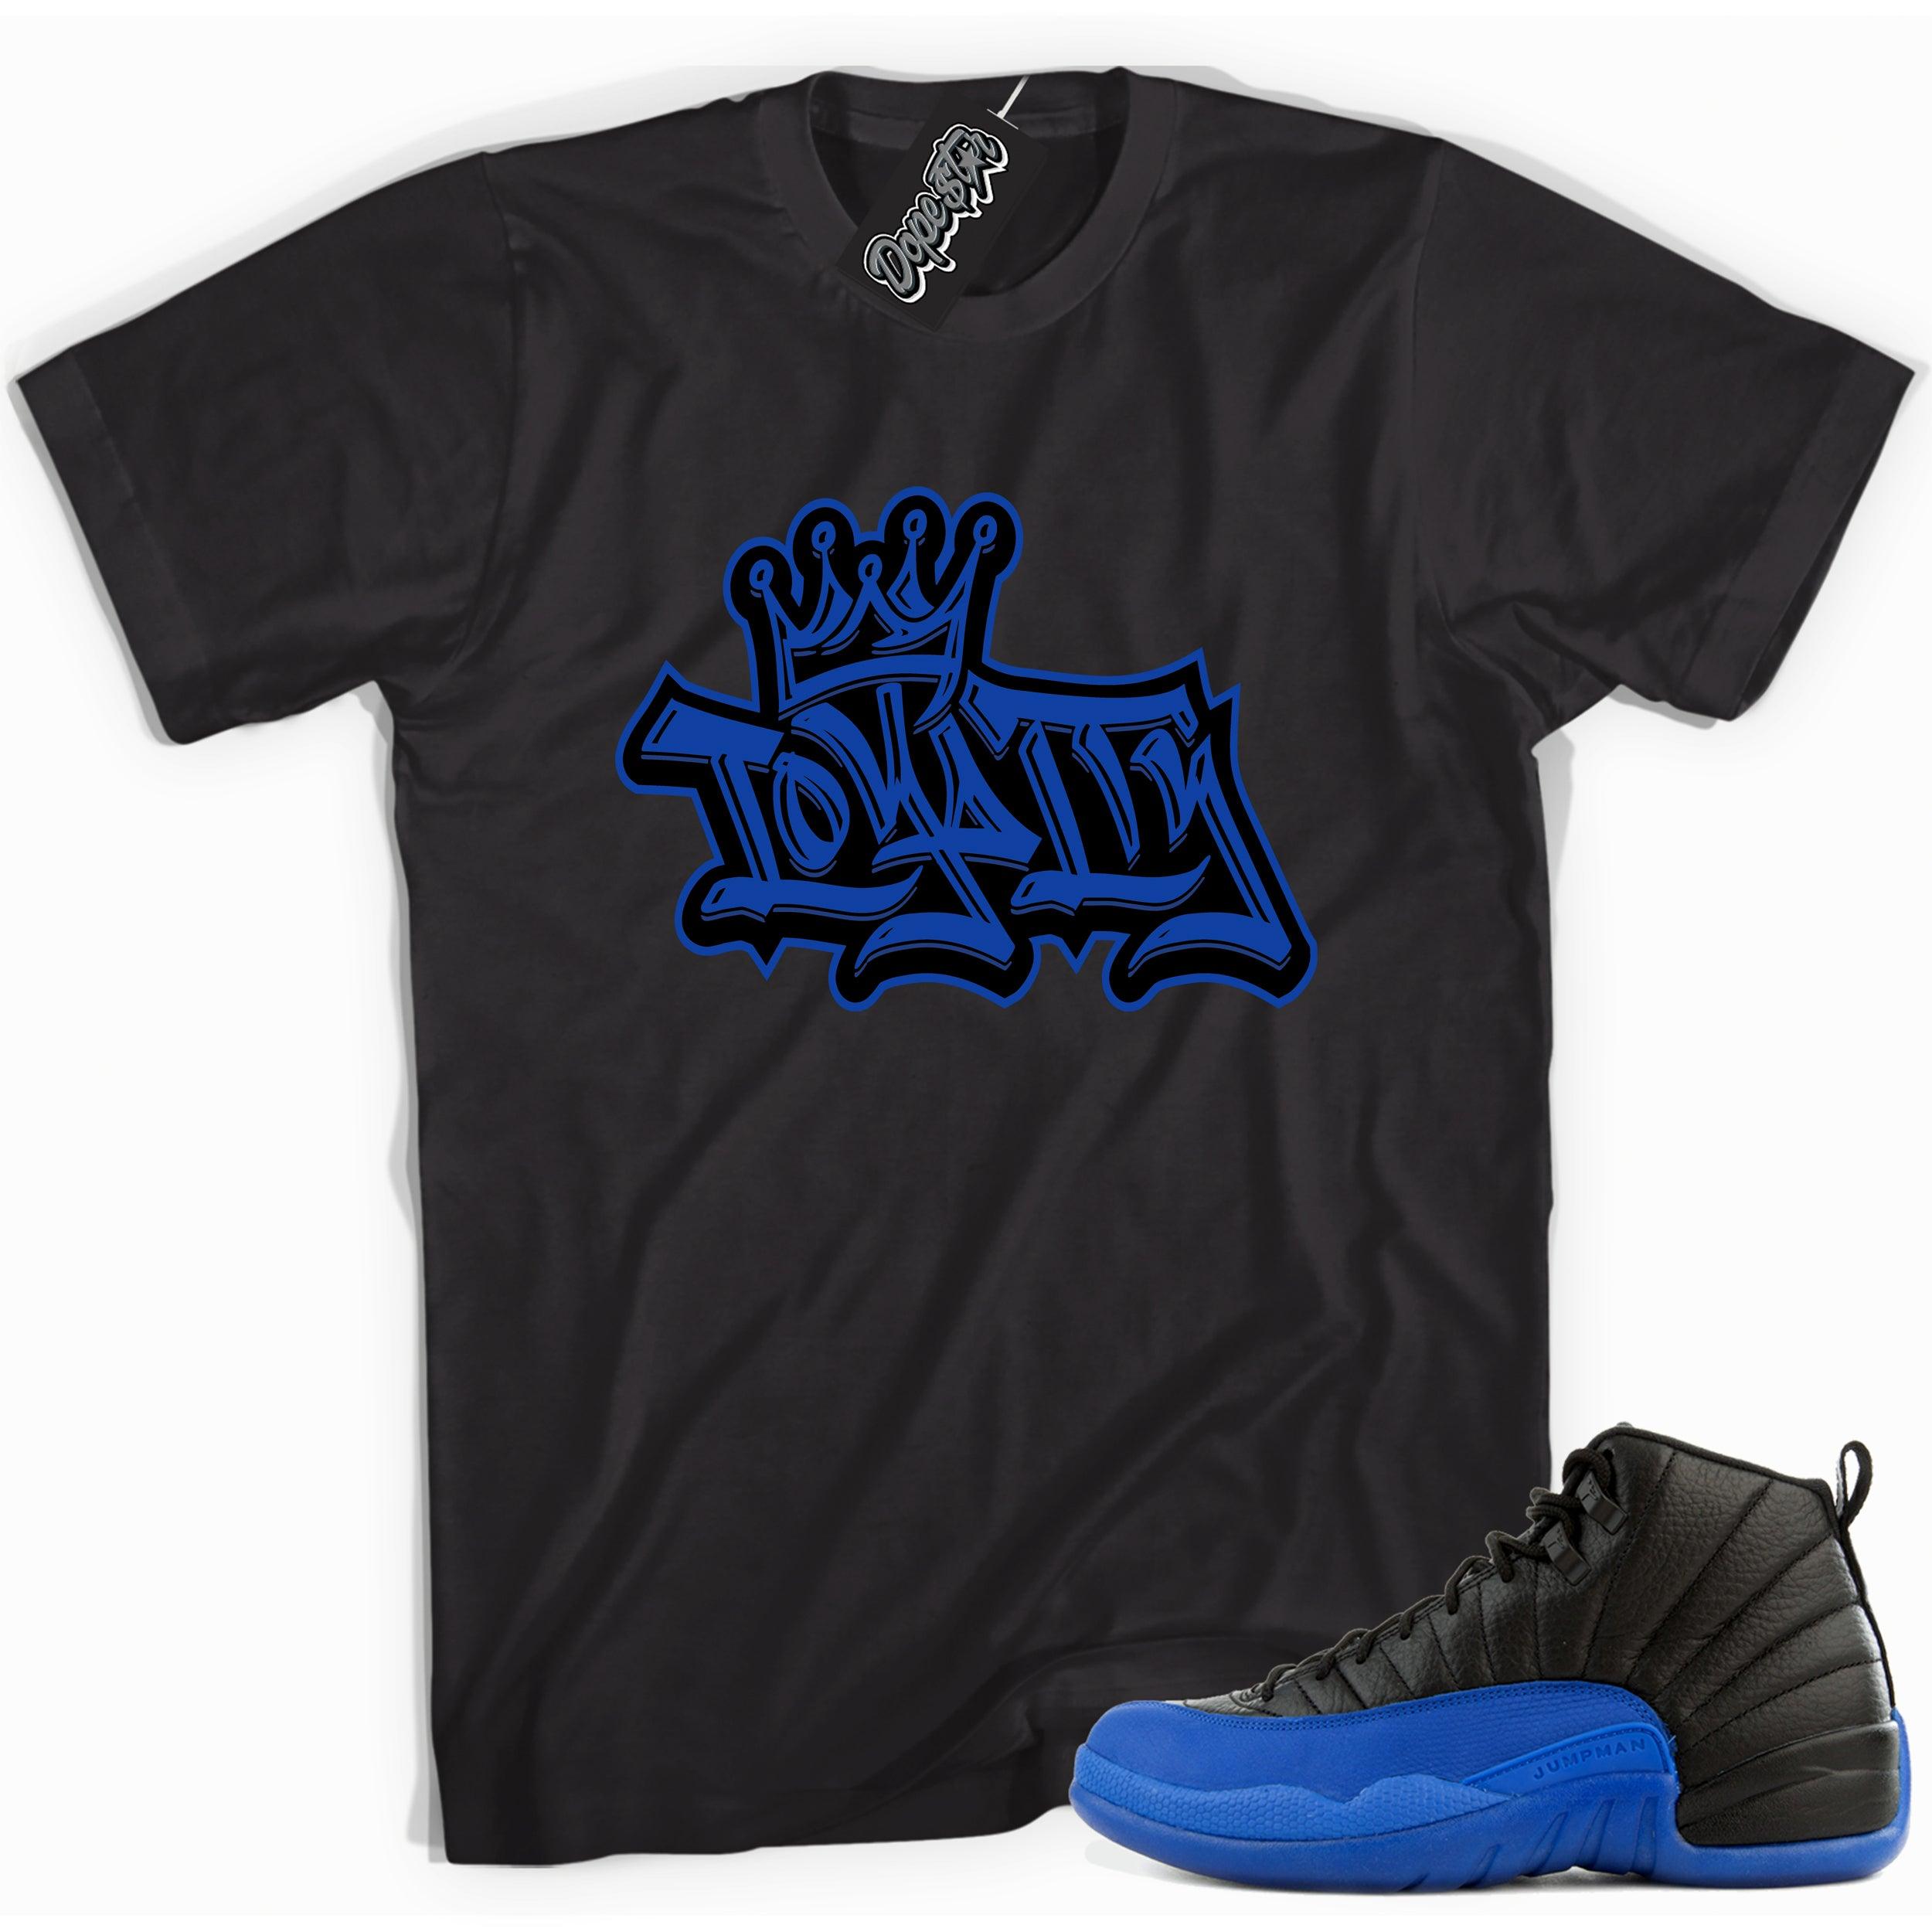 Cool black graphic tee with 'loyalty' print, that perfectly matches  Air Jordan 12 Retro Black Game Royal sneakers.